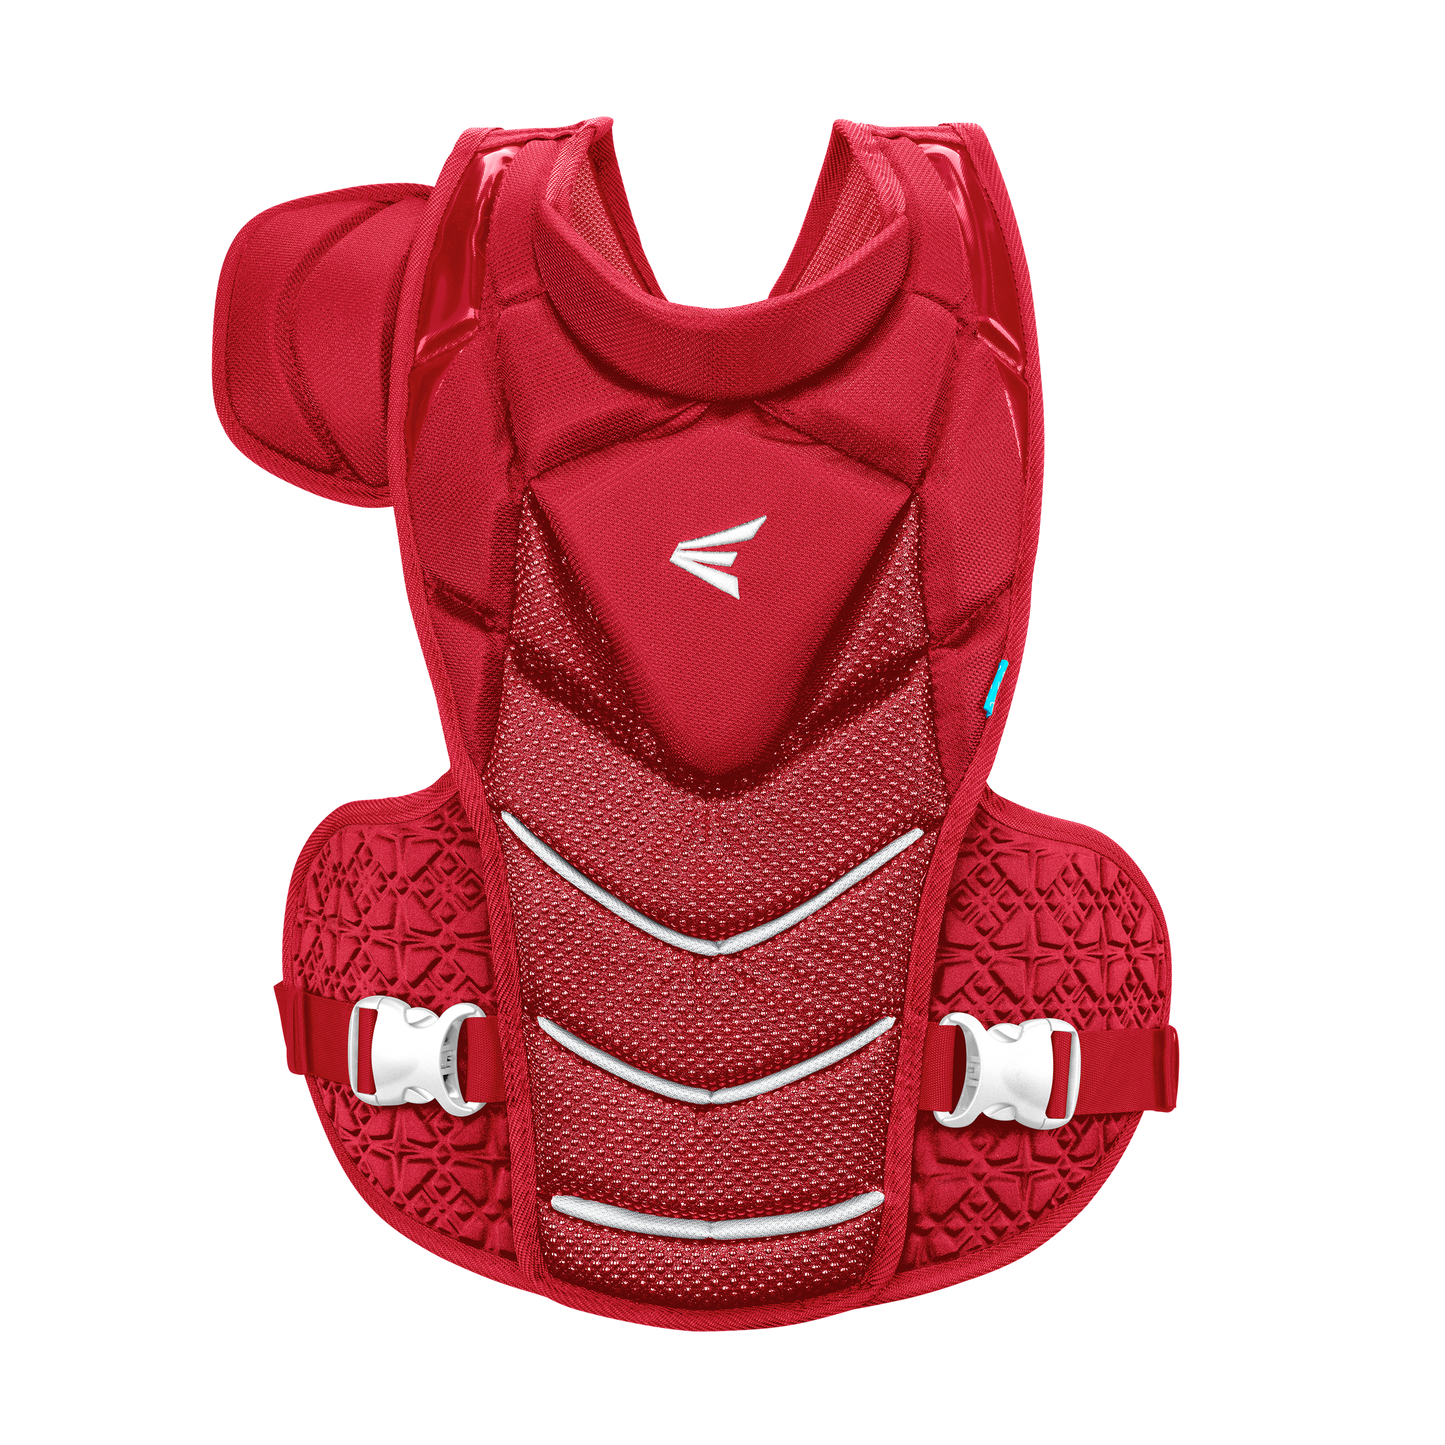 Easton Jen Schro The Very Best Fastpitch Softball Catchers Chest Protector